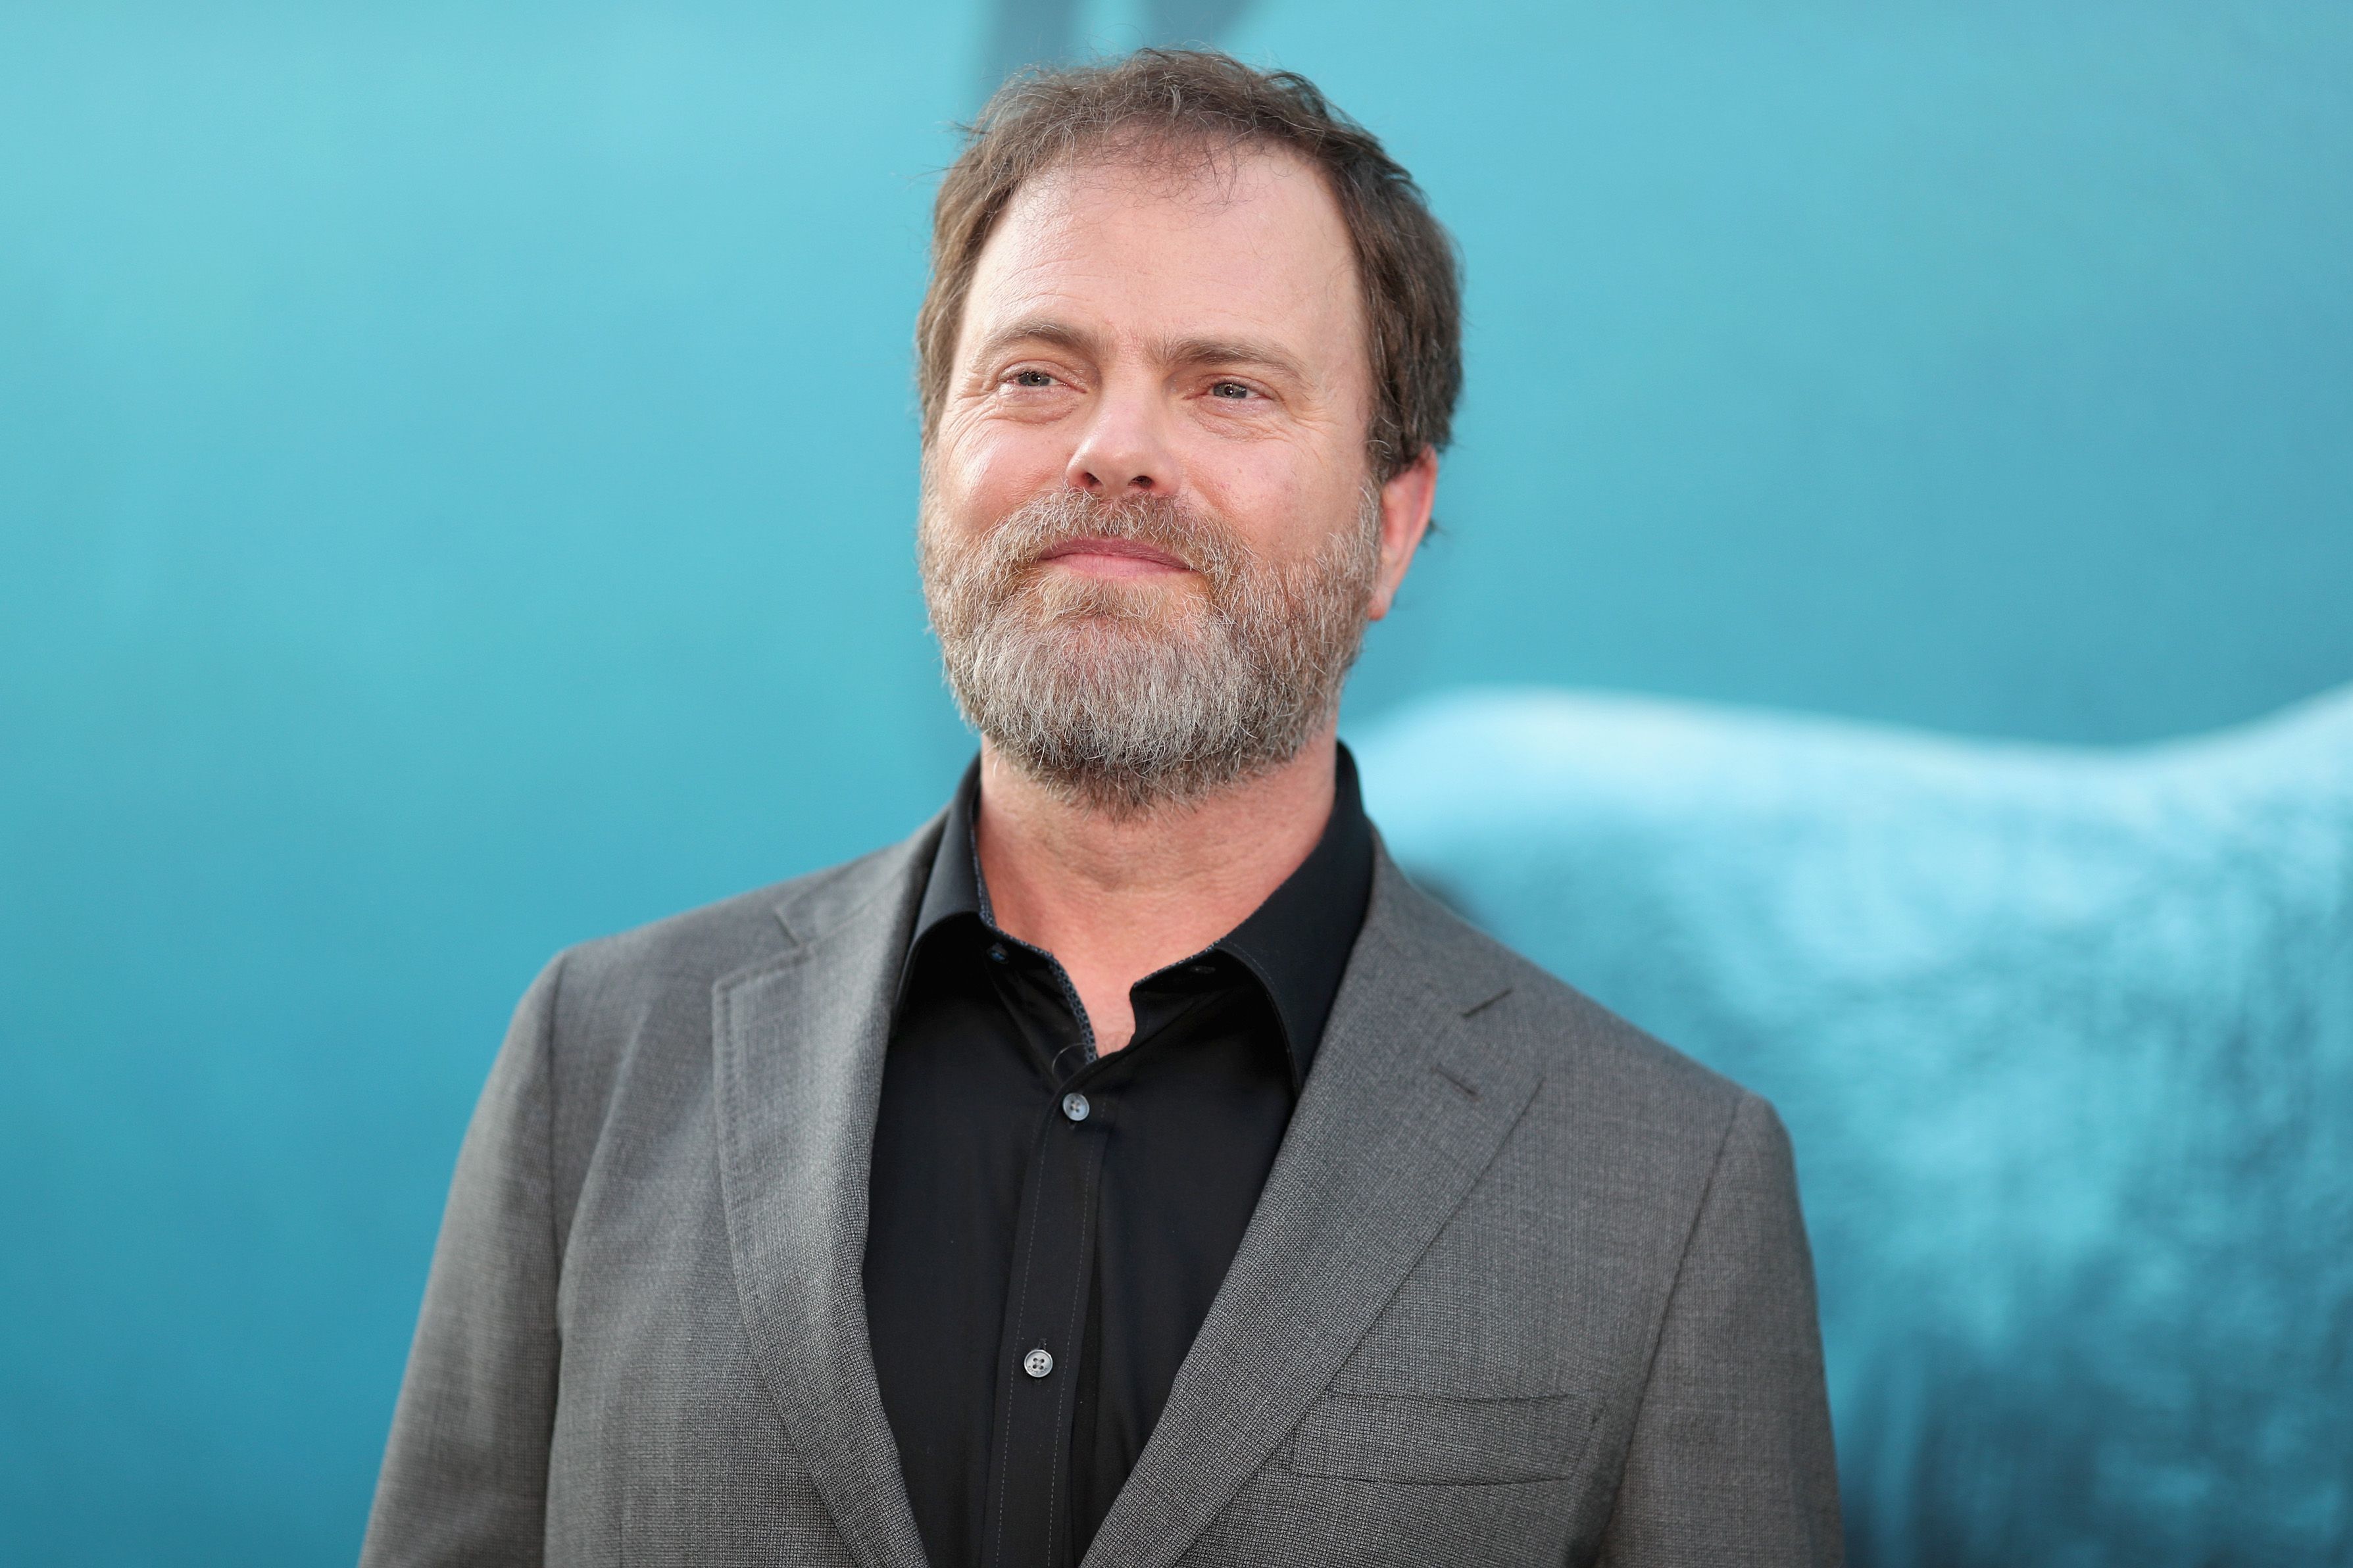 Rainn Wilson on August 6, 2018, in Hollywood, California. | Source: Getty Images